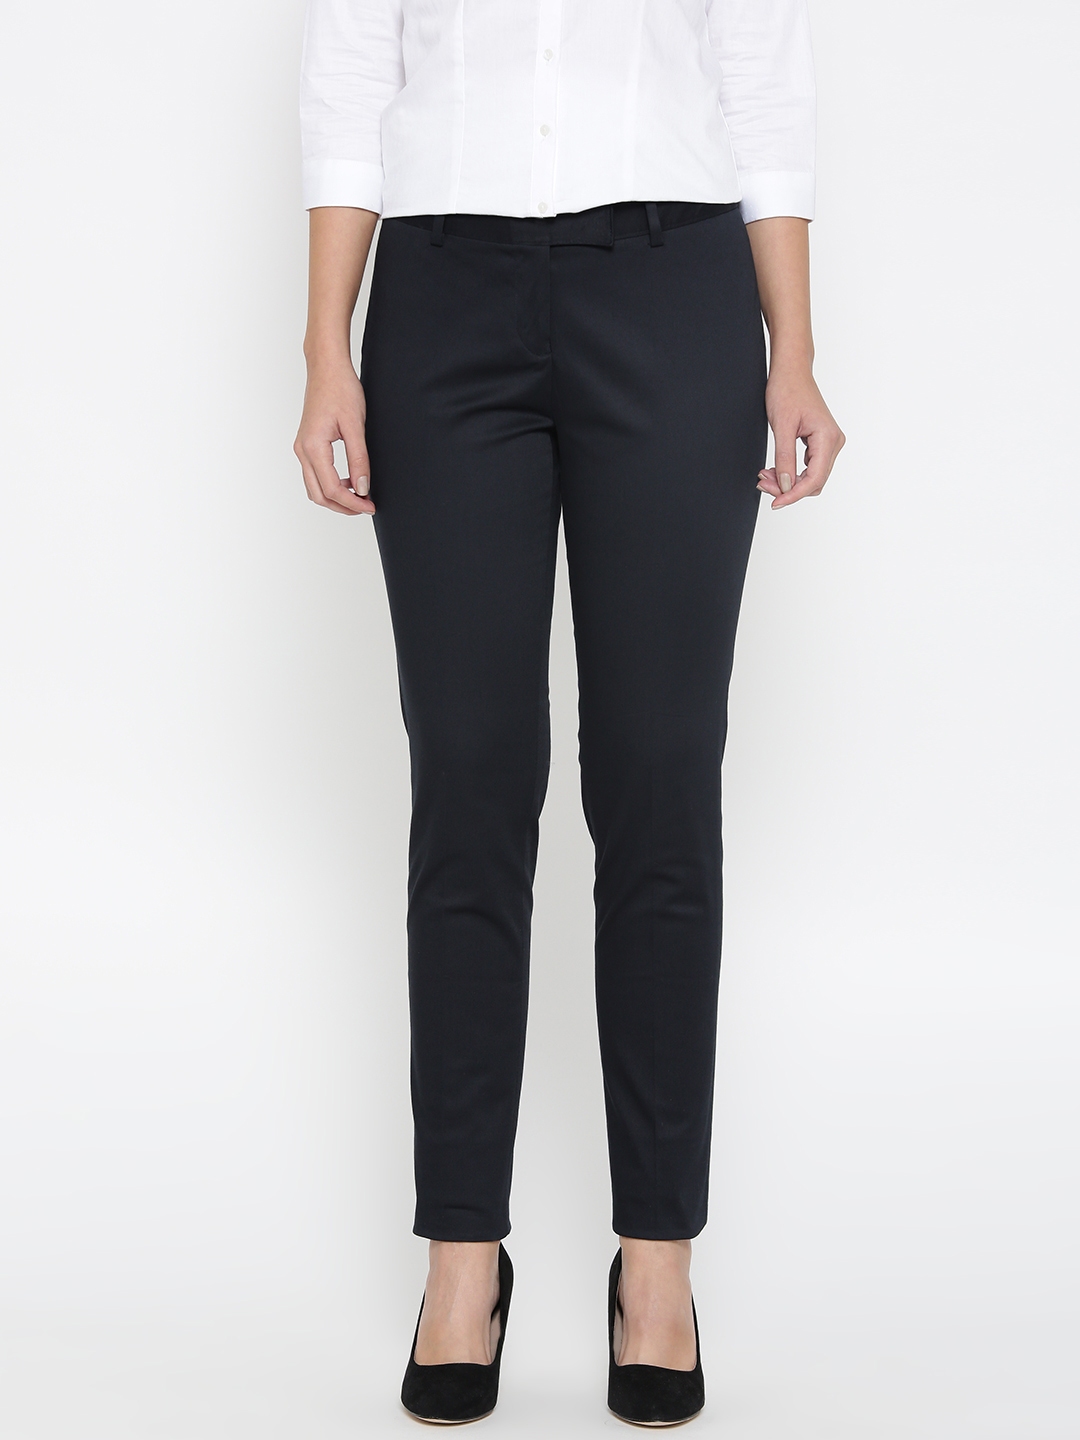 Buy Wills Lifestyle Women Navy Blue Slim Fit Solid Formal Trousers   Trousers for Women 2093916  Myntra